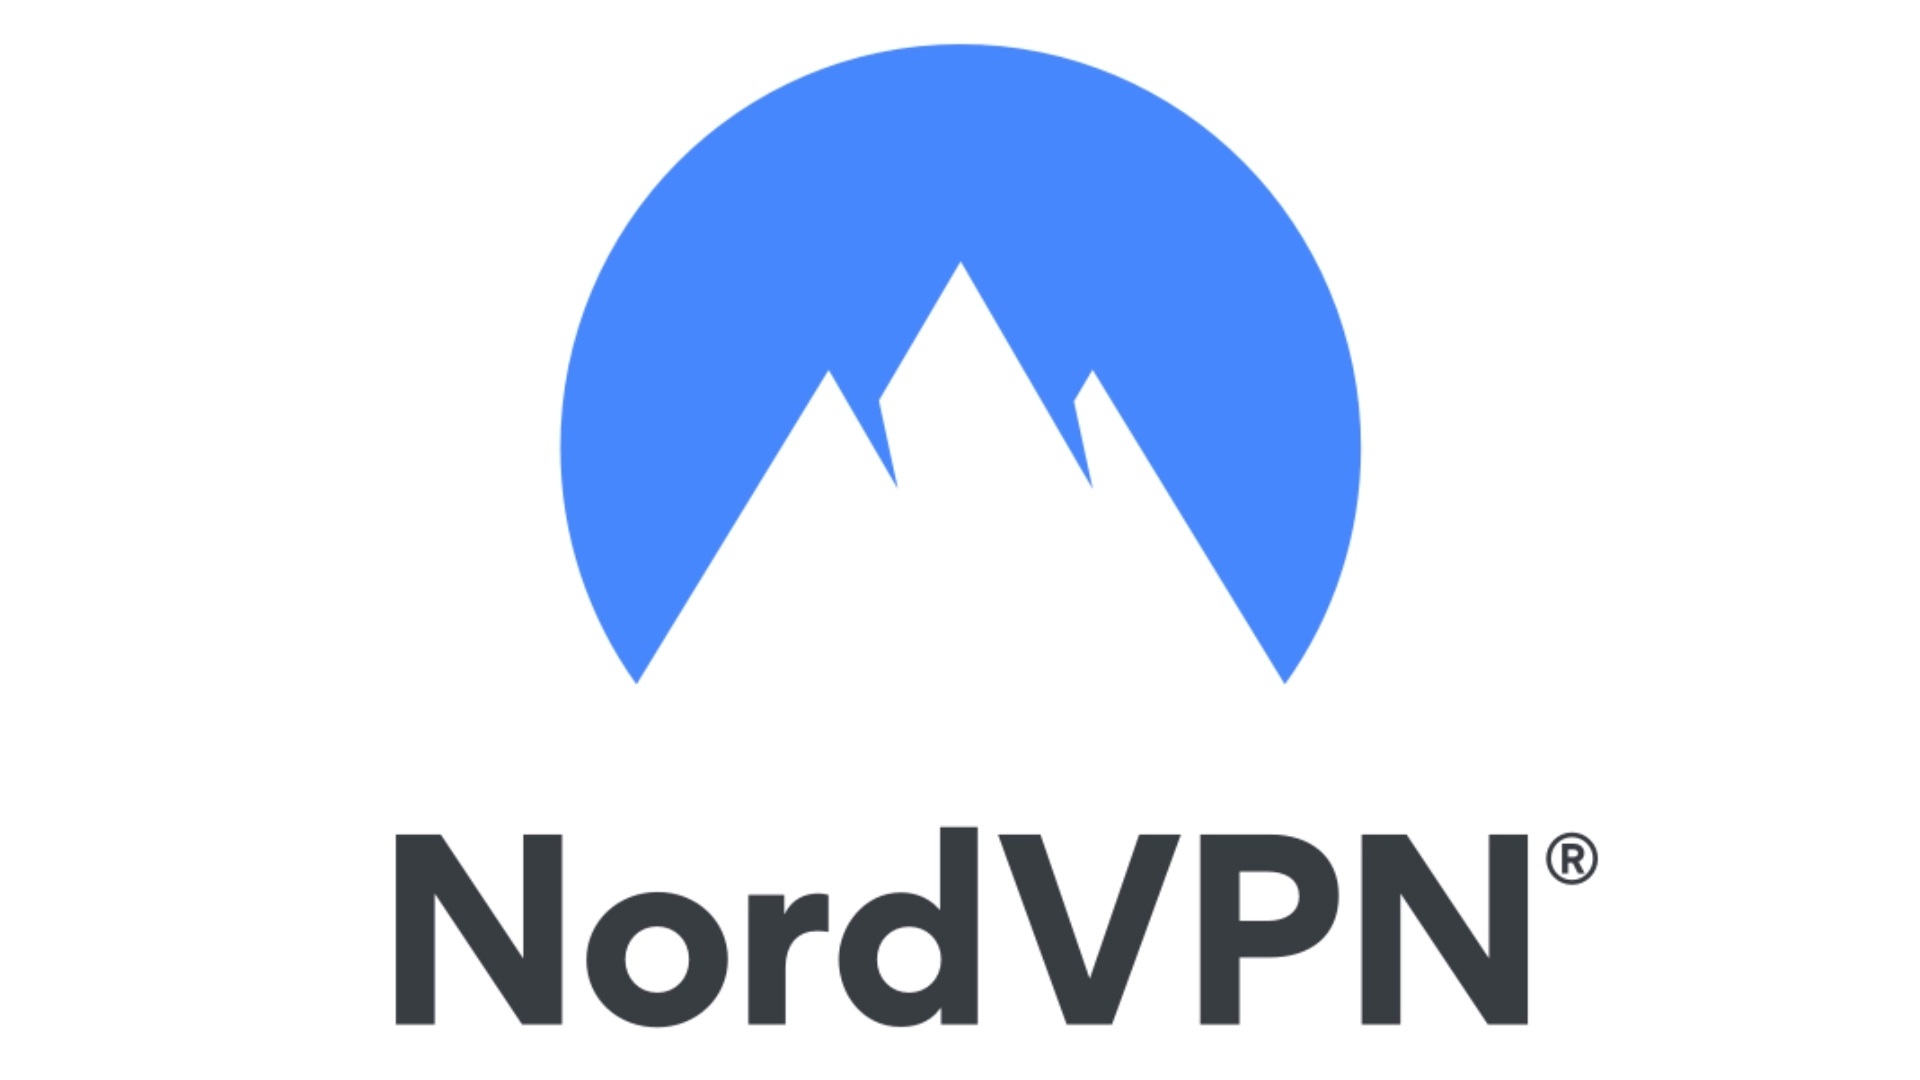 VPN Browser Extensions: image shows the logo of NordVPN, the best Chrome VPN.